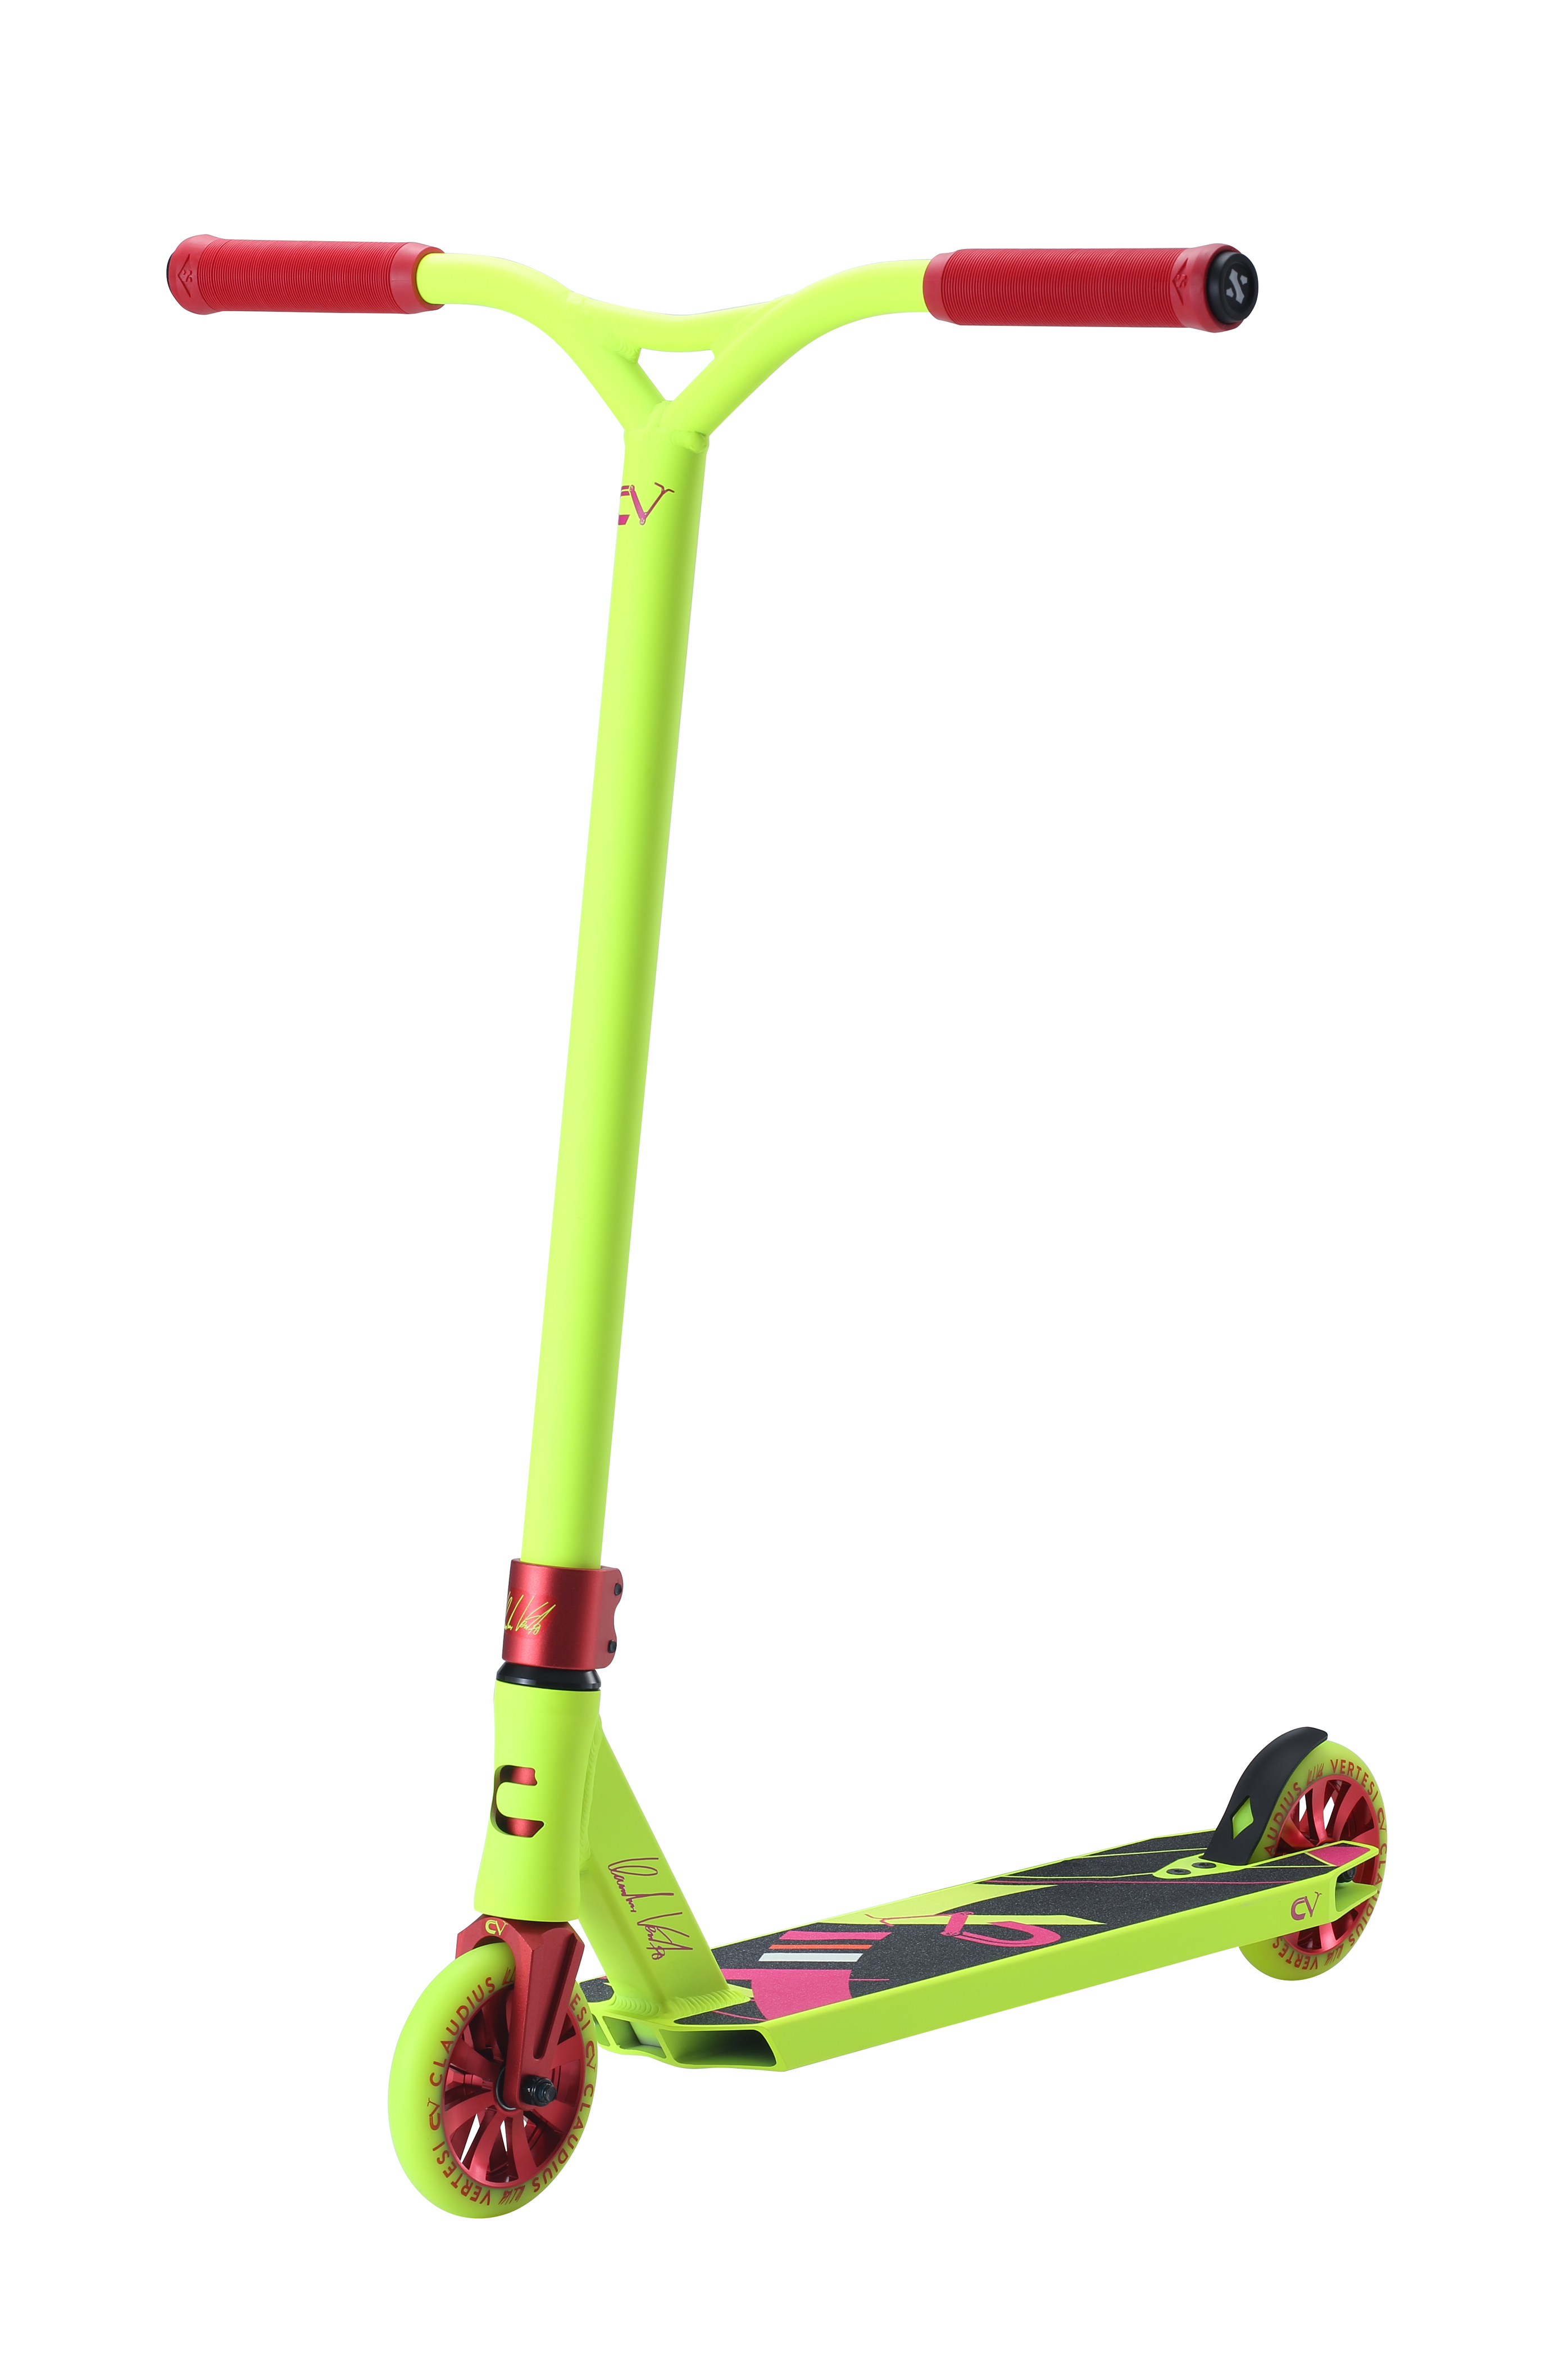 CV Complete Scooter Neon - Sacrifice Scooters